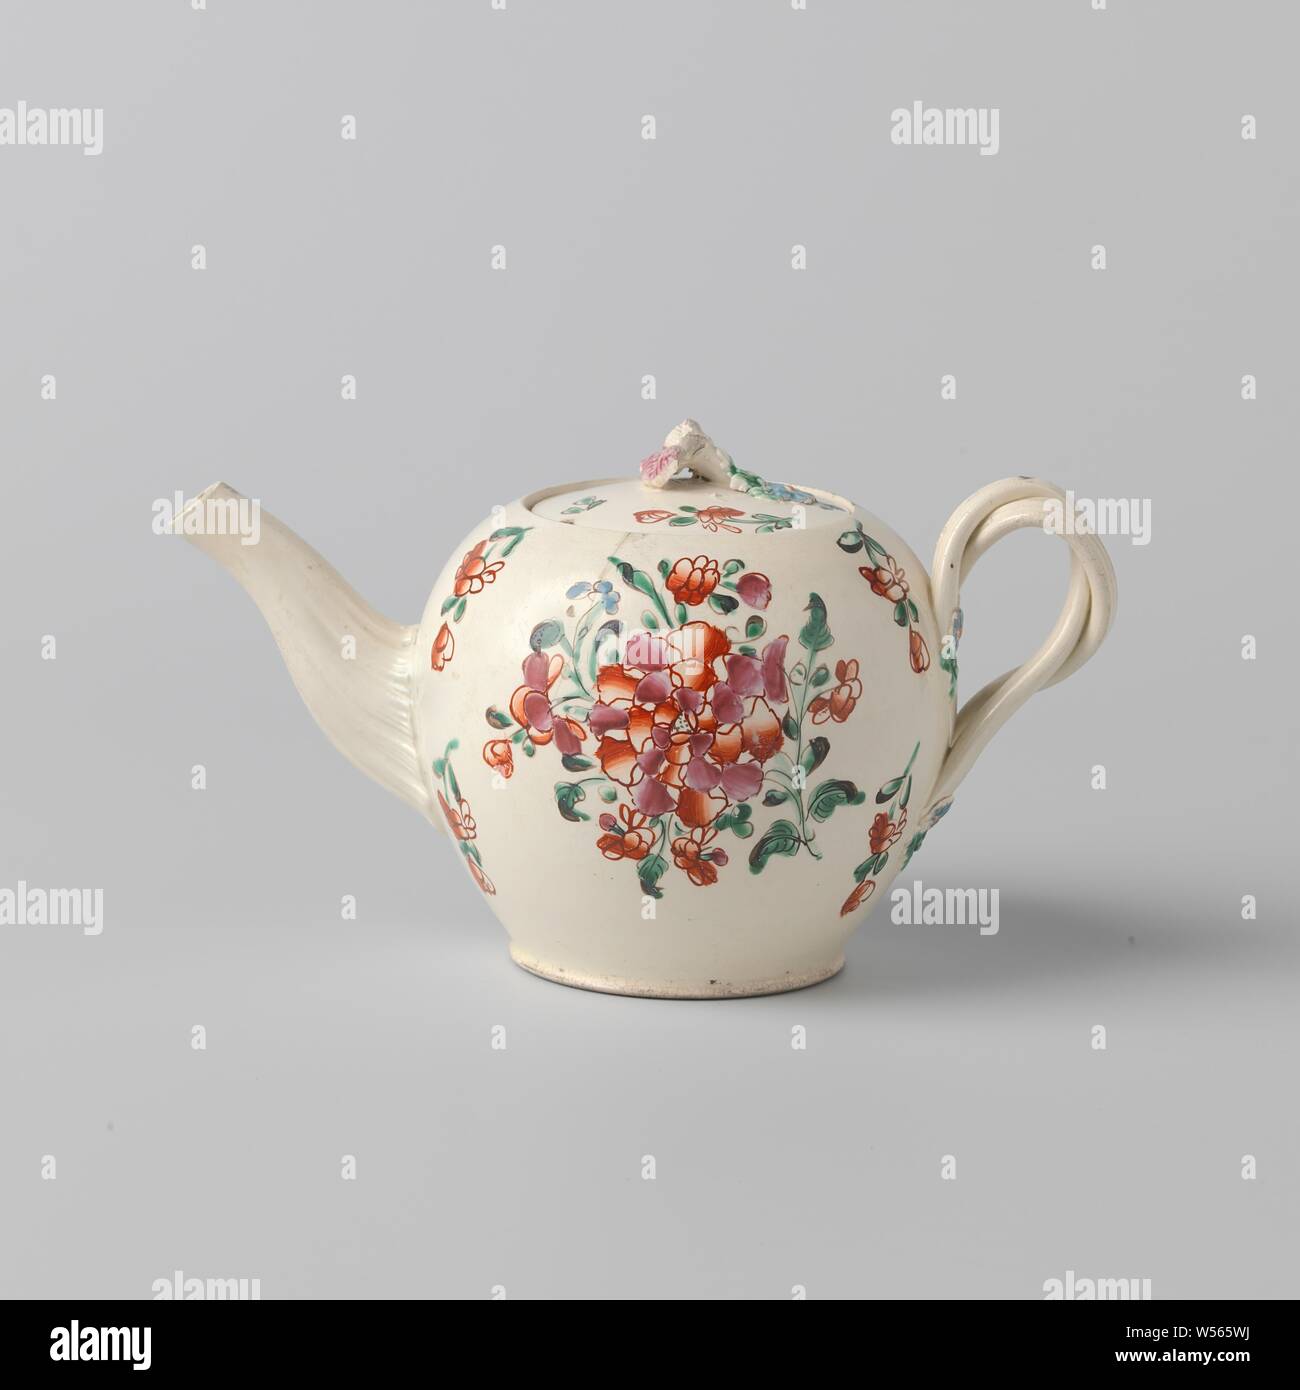 https://c8.alamy.com/comp/W565WJ/teapot-of-hard-fired-earthenware-leeds-creamware-with-multicolored-decoration-on-the-glaze-canopiche-teapot-of-hard-fired-earthenware-a-braided-ear-and-a-ribbed-spout-the-teapot-is-painted-with-flower-bouquets-and-flower-branches-in-red-green-purple-and-blue-enamel-anonymous-leeds-c-1770-c-1790-earthenware-h-85-cm-w-162-cm-d-93-cm-d-58-cm-W565WJ.jpg